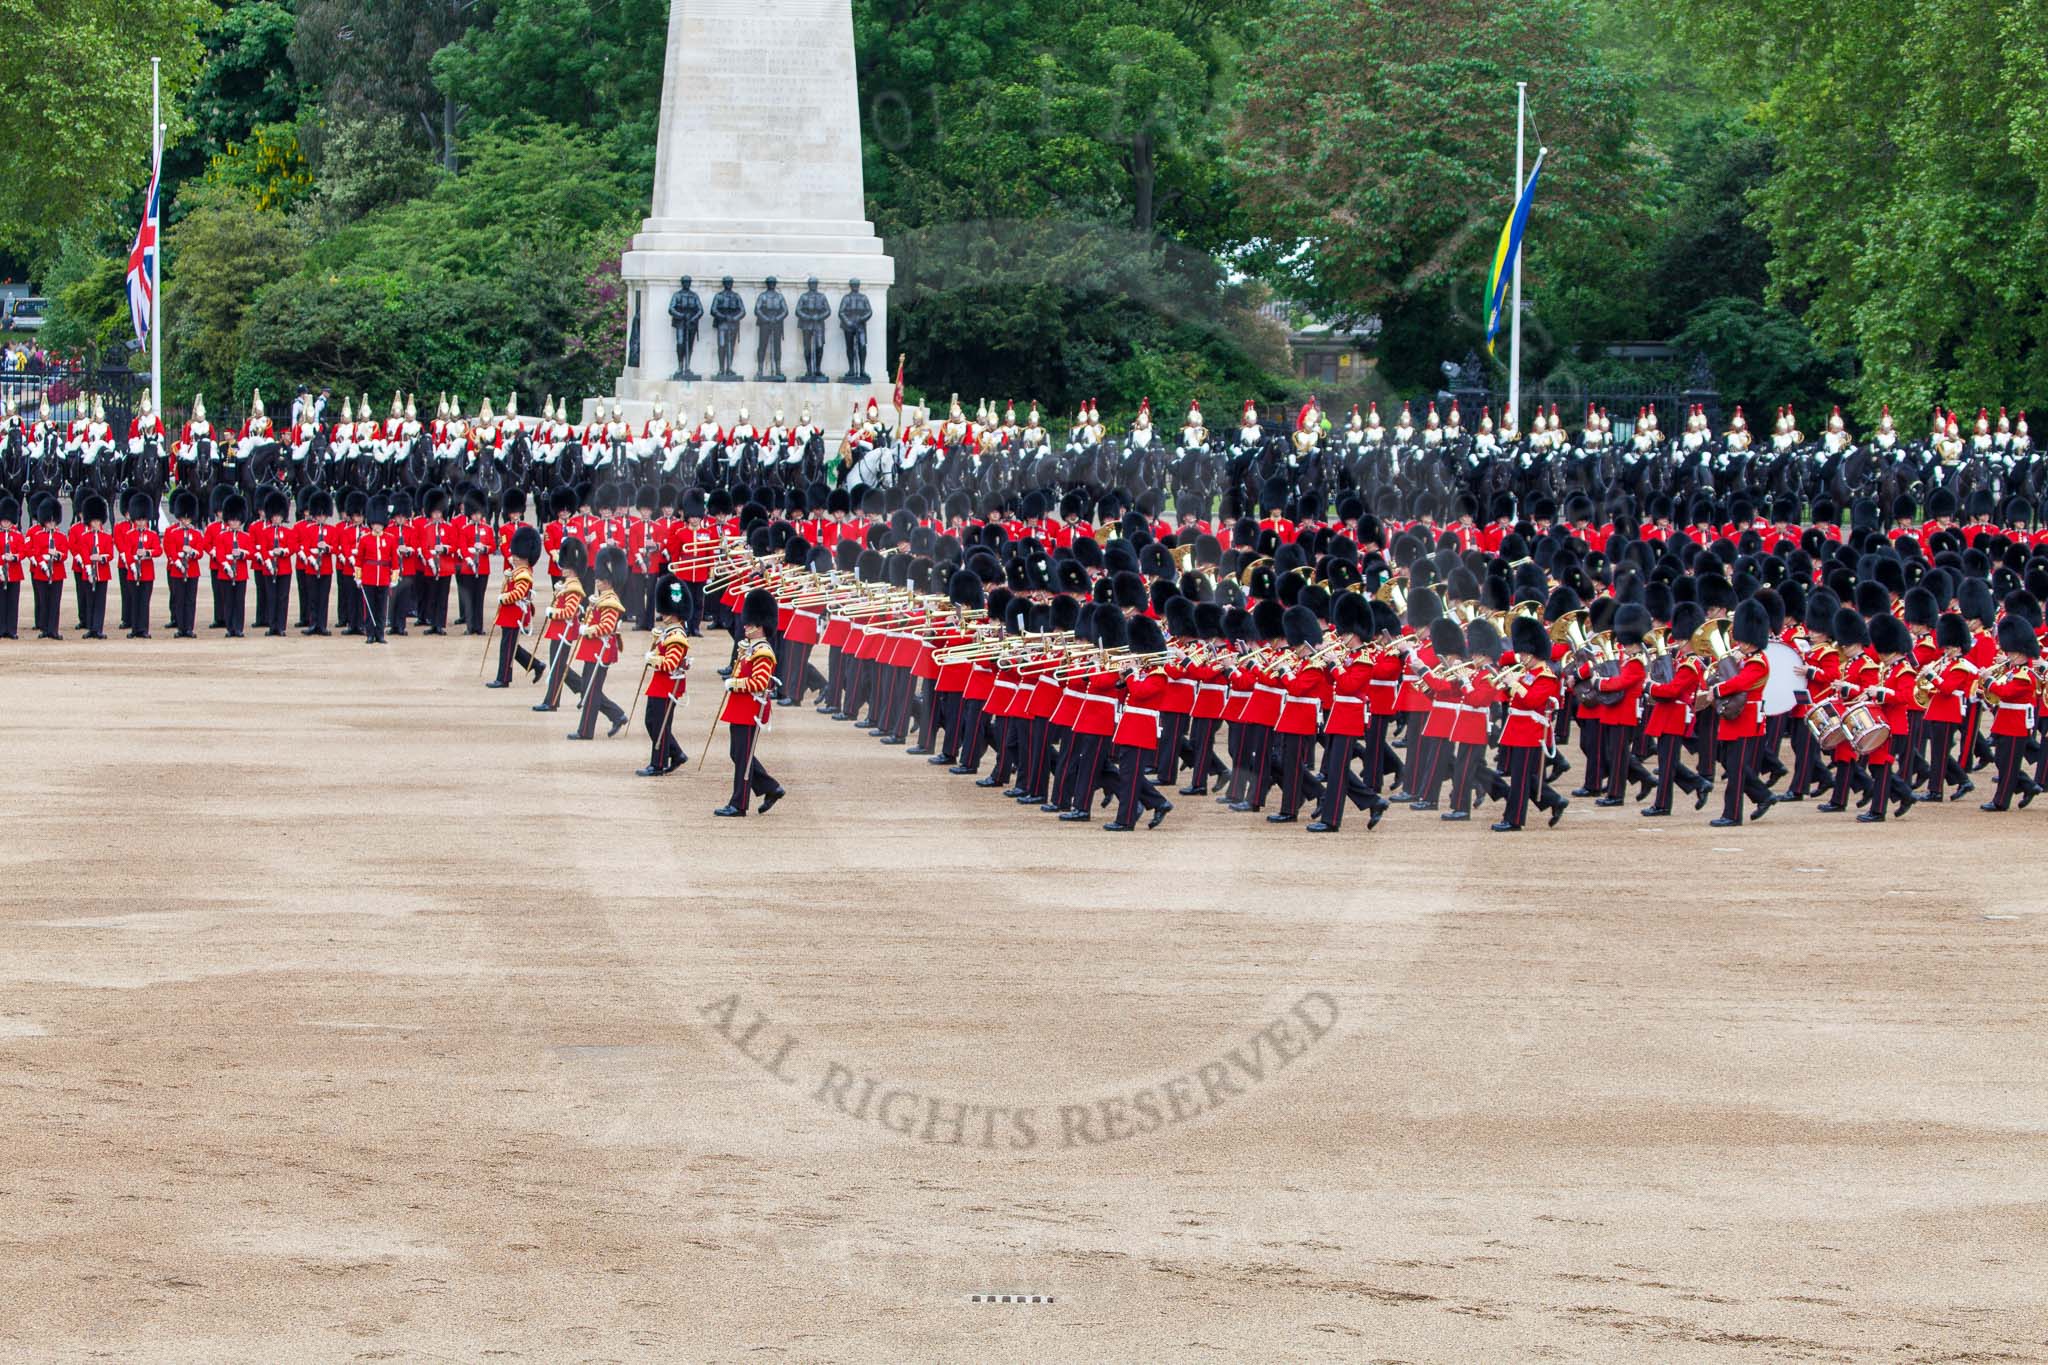 Major General's Review 2013: The five Drum Majors leading the Massed Bands as they are playing the Grenadiers Slow March..
Horse Guards Parade, Westminster,
London SW1,

United Kingdom,
on 01 June 2013 at 11:23, image #421